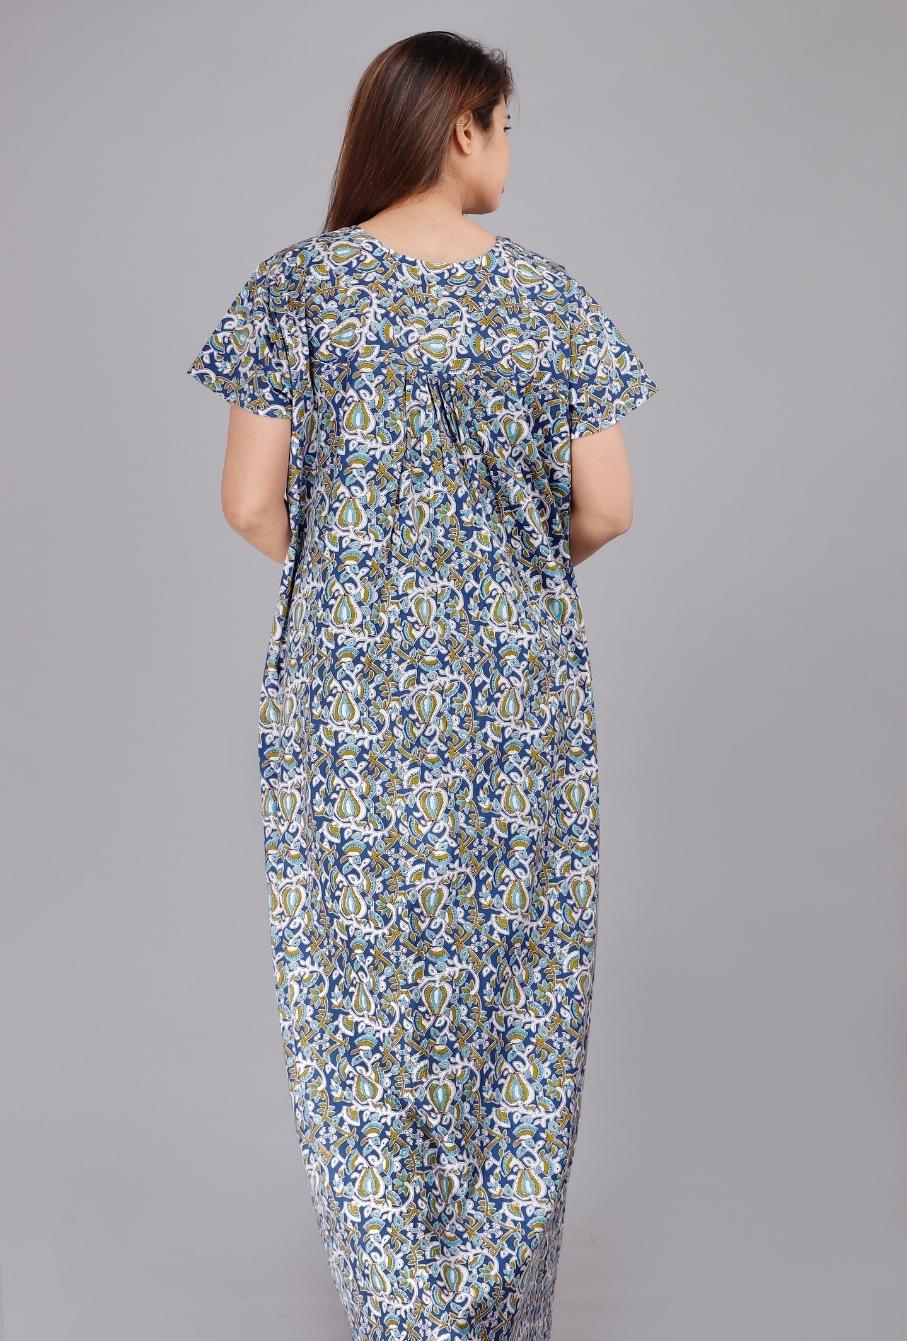 Women Plus Size All Floral Nighty/ Night Gown | Apella